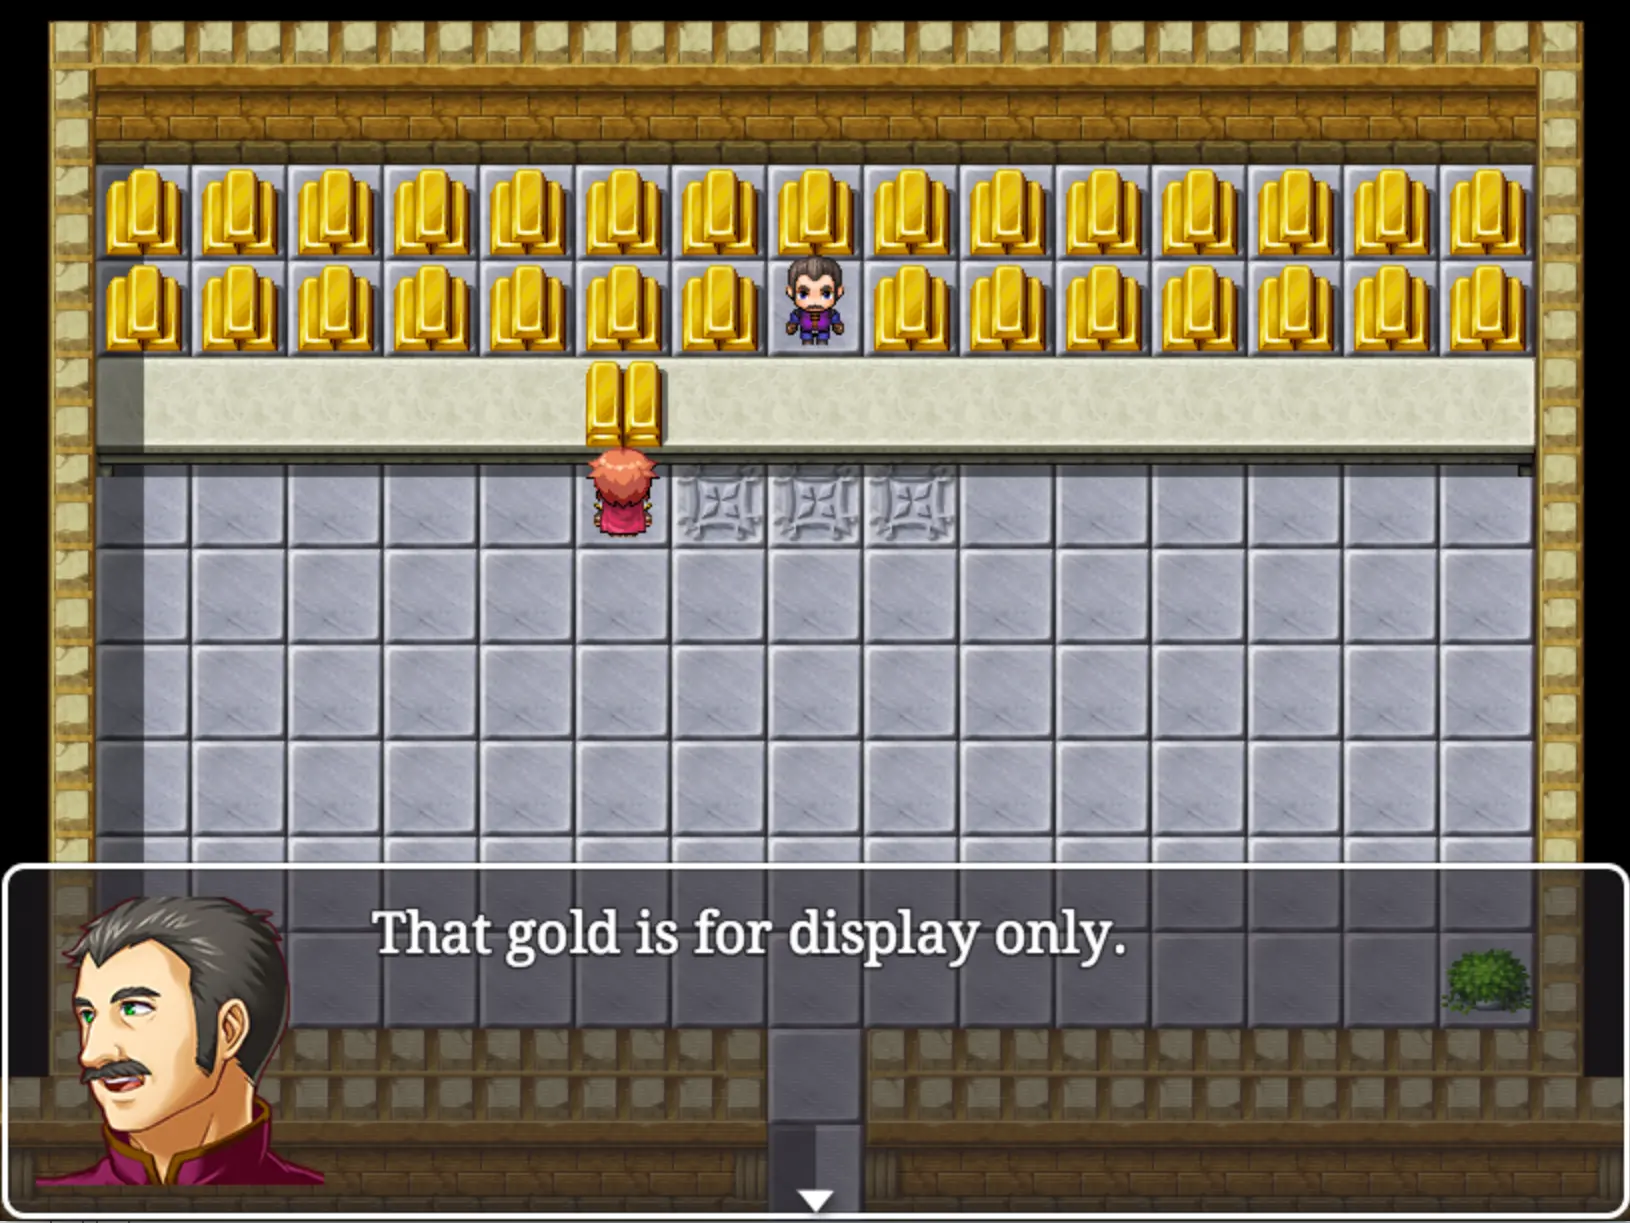 Screenshot of game with the player character standing in a bank with many, many pieces of gold behind the counter. They are looking at one piece of gold and the teller is saying "That gold is for display only."